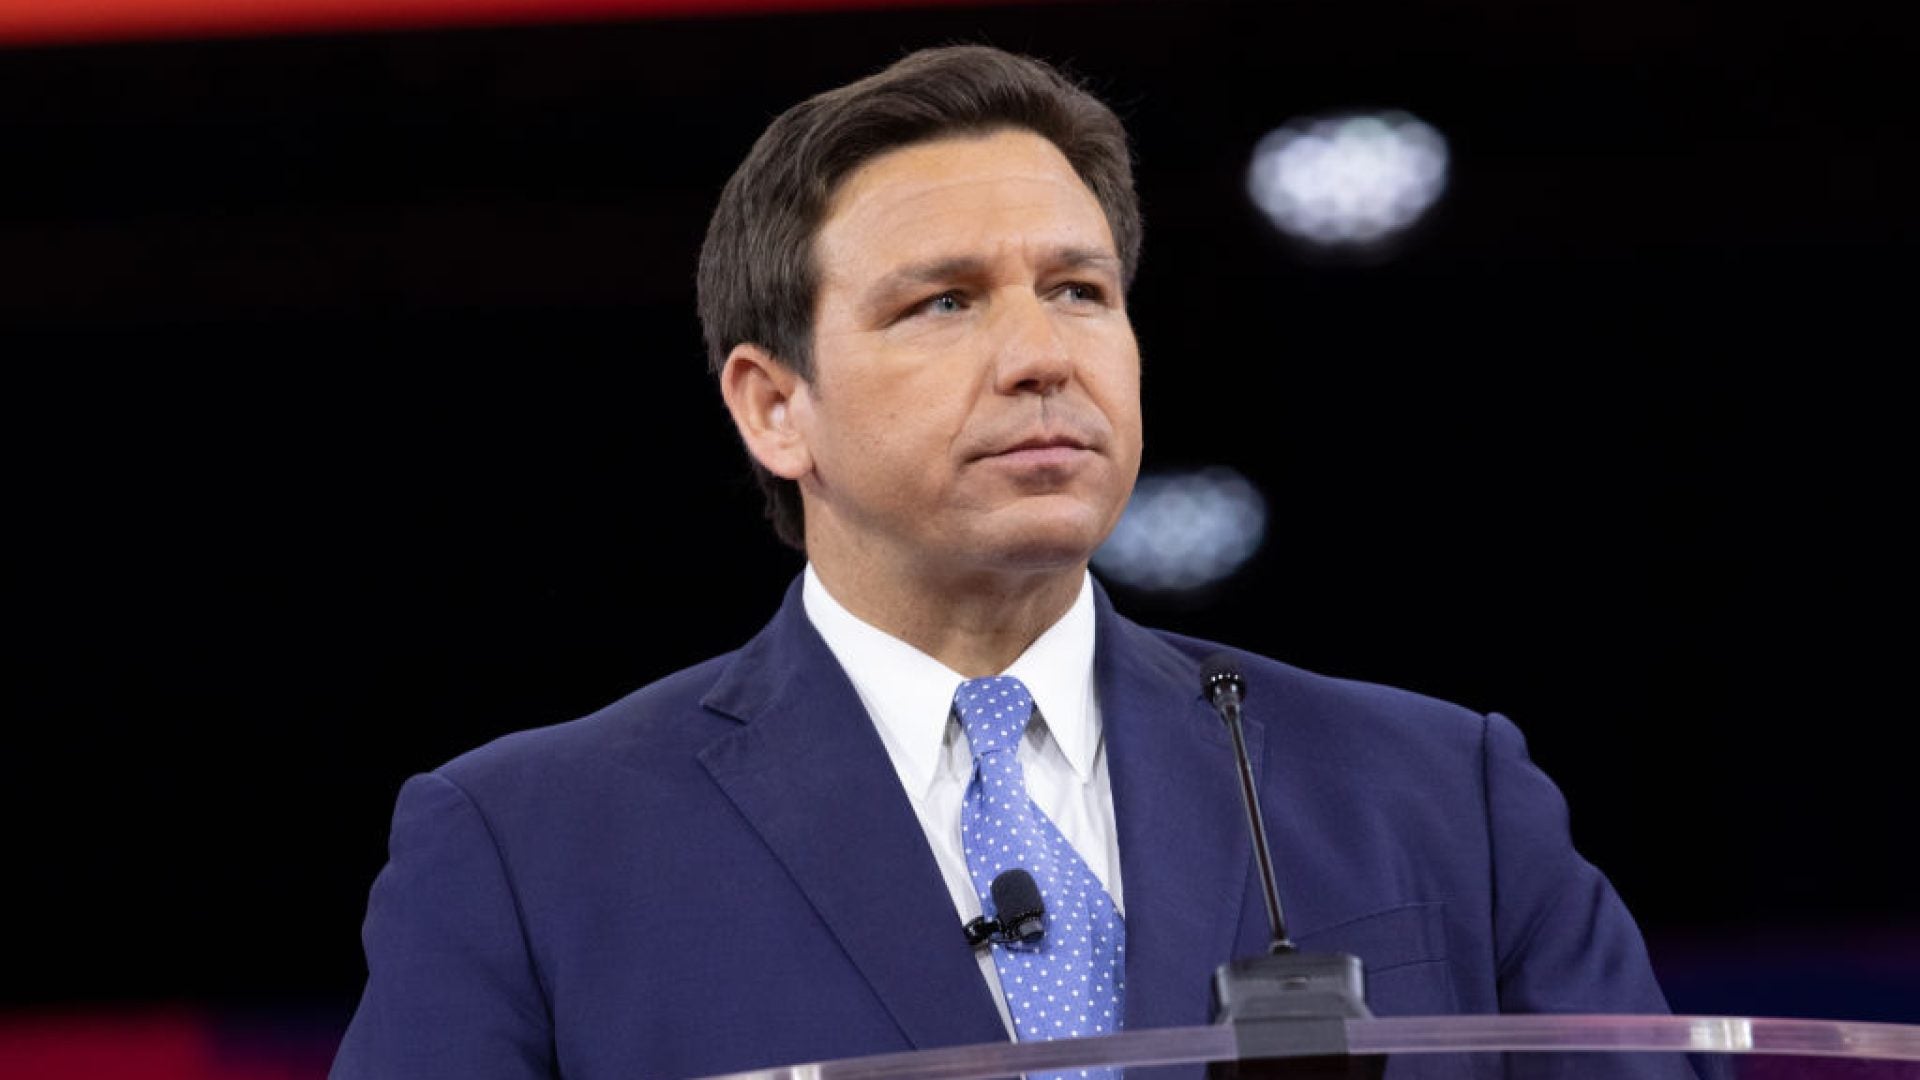 Florida Judge Rules DeSantis-Backed Voting Map Illegally Harms Black Voters